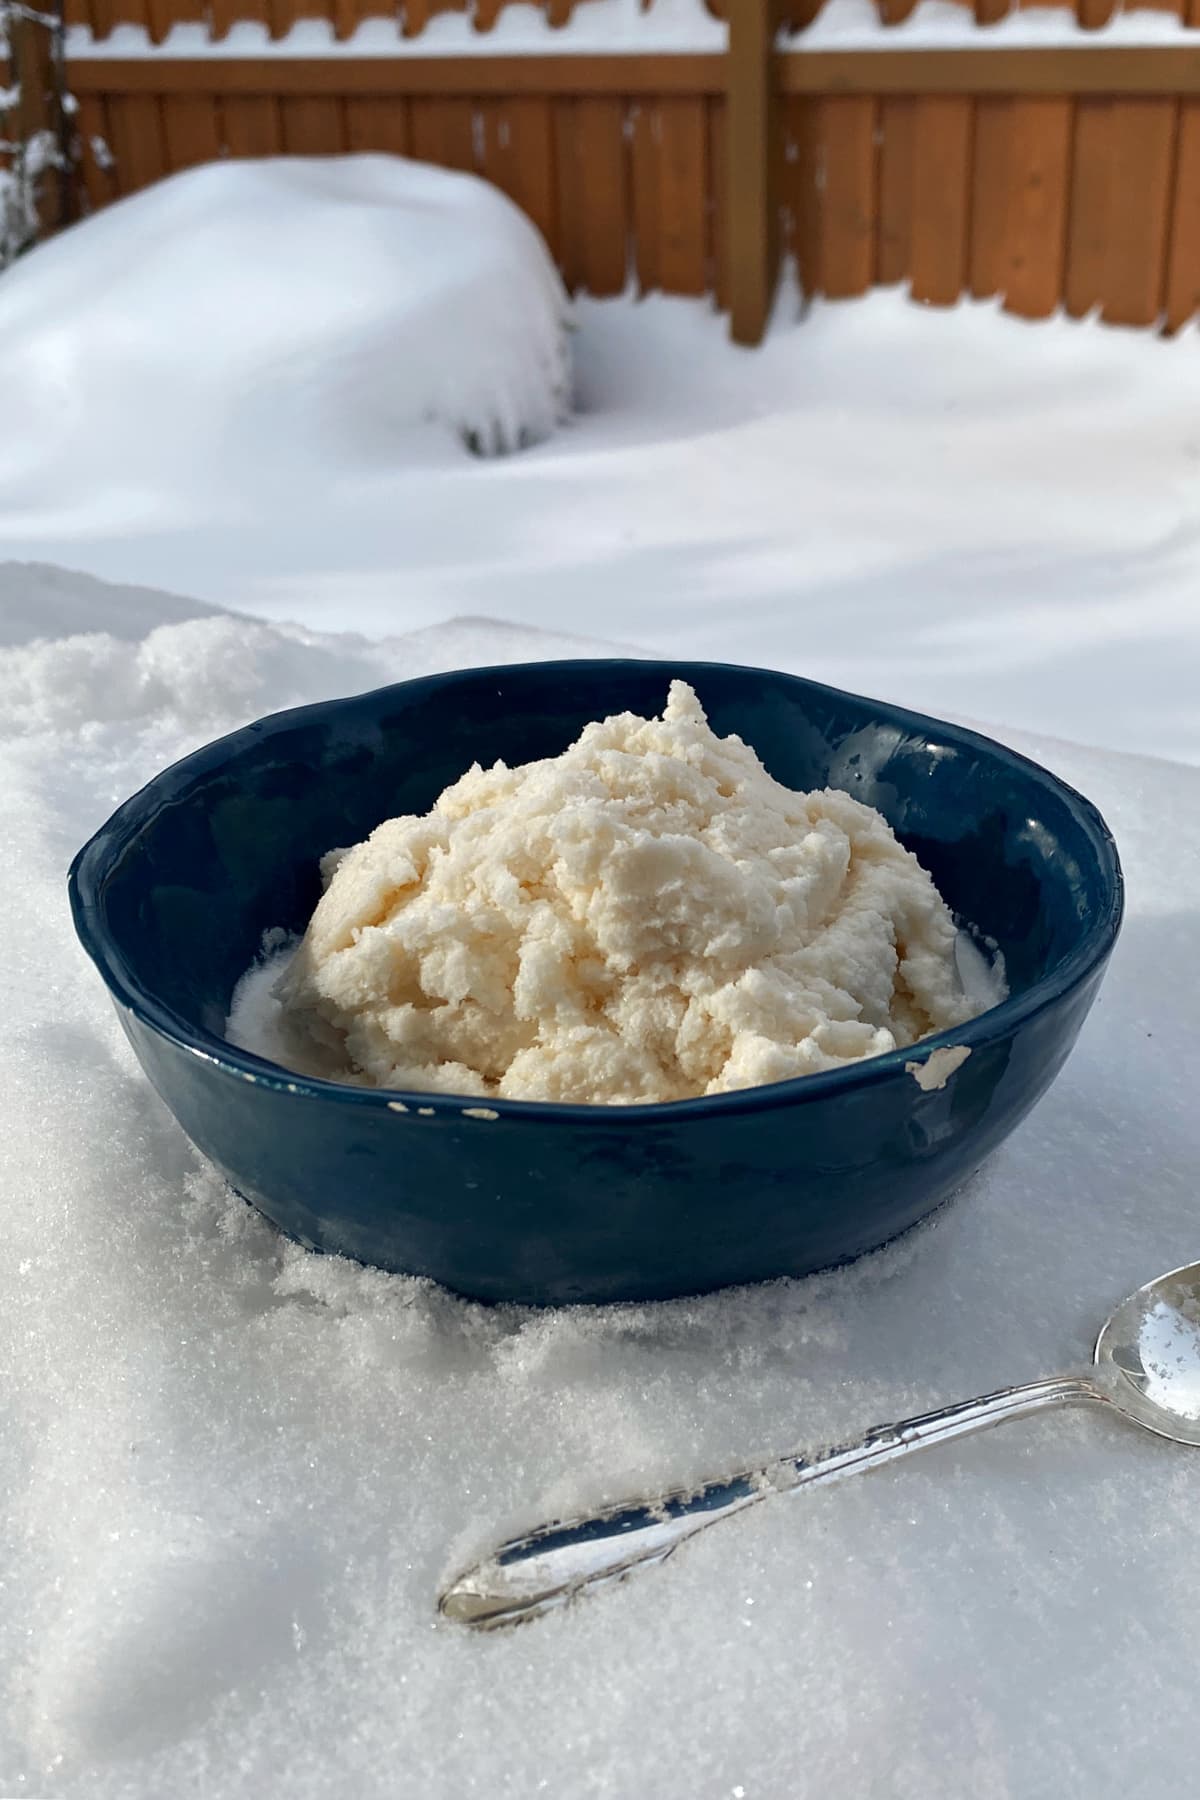 Vertical image of snow ice cream in a bowl, resting in a bed of fresh snow.